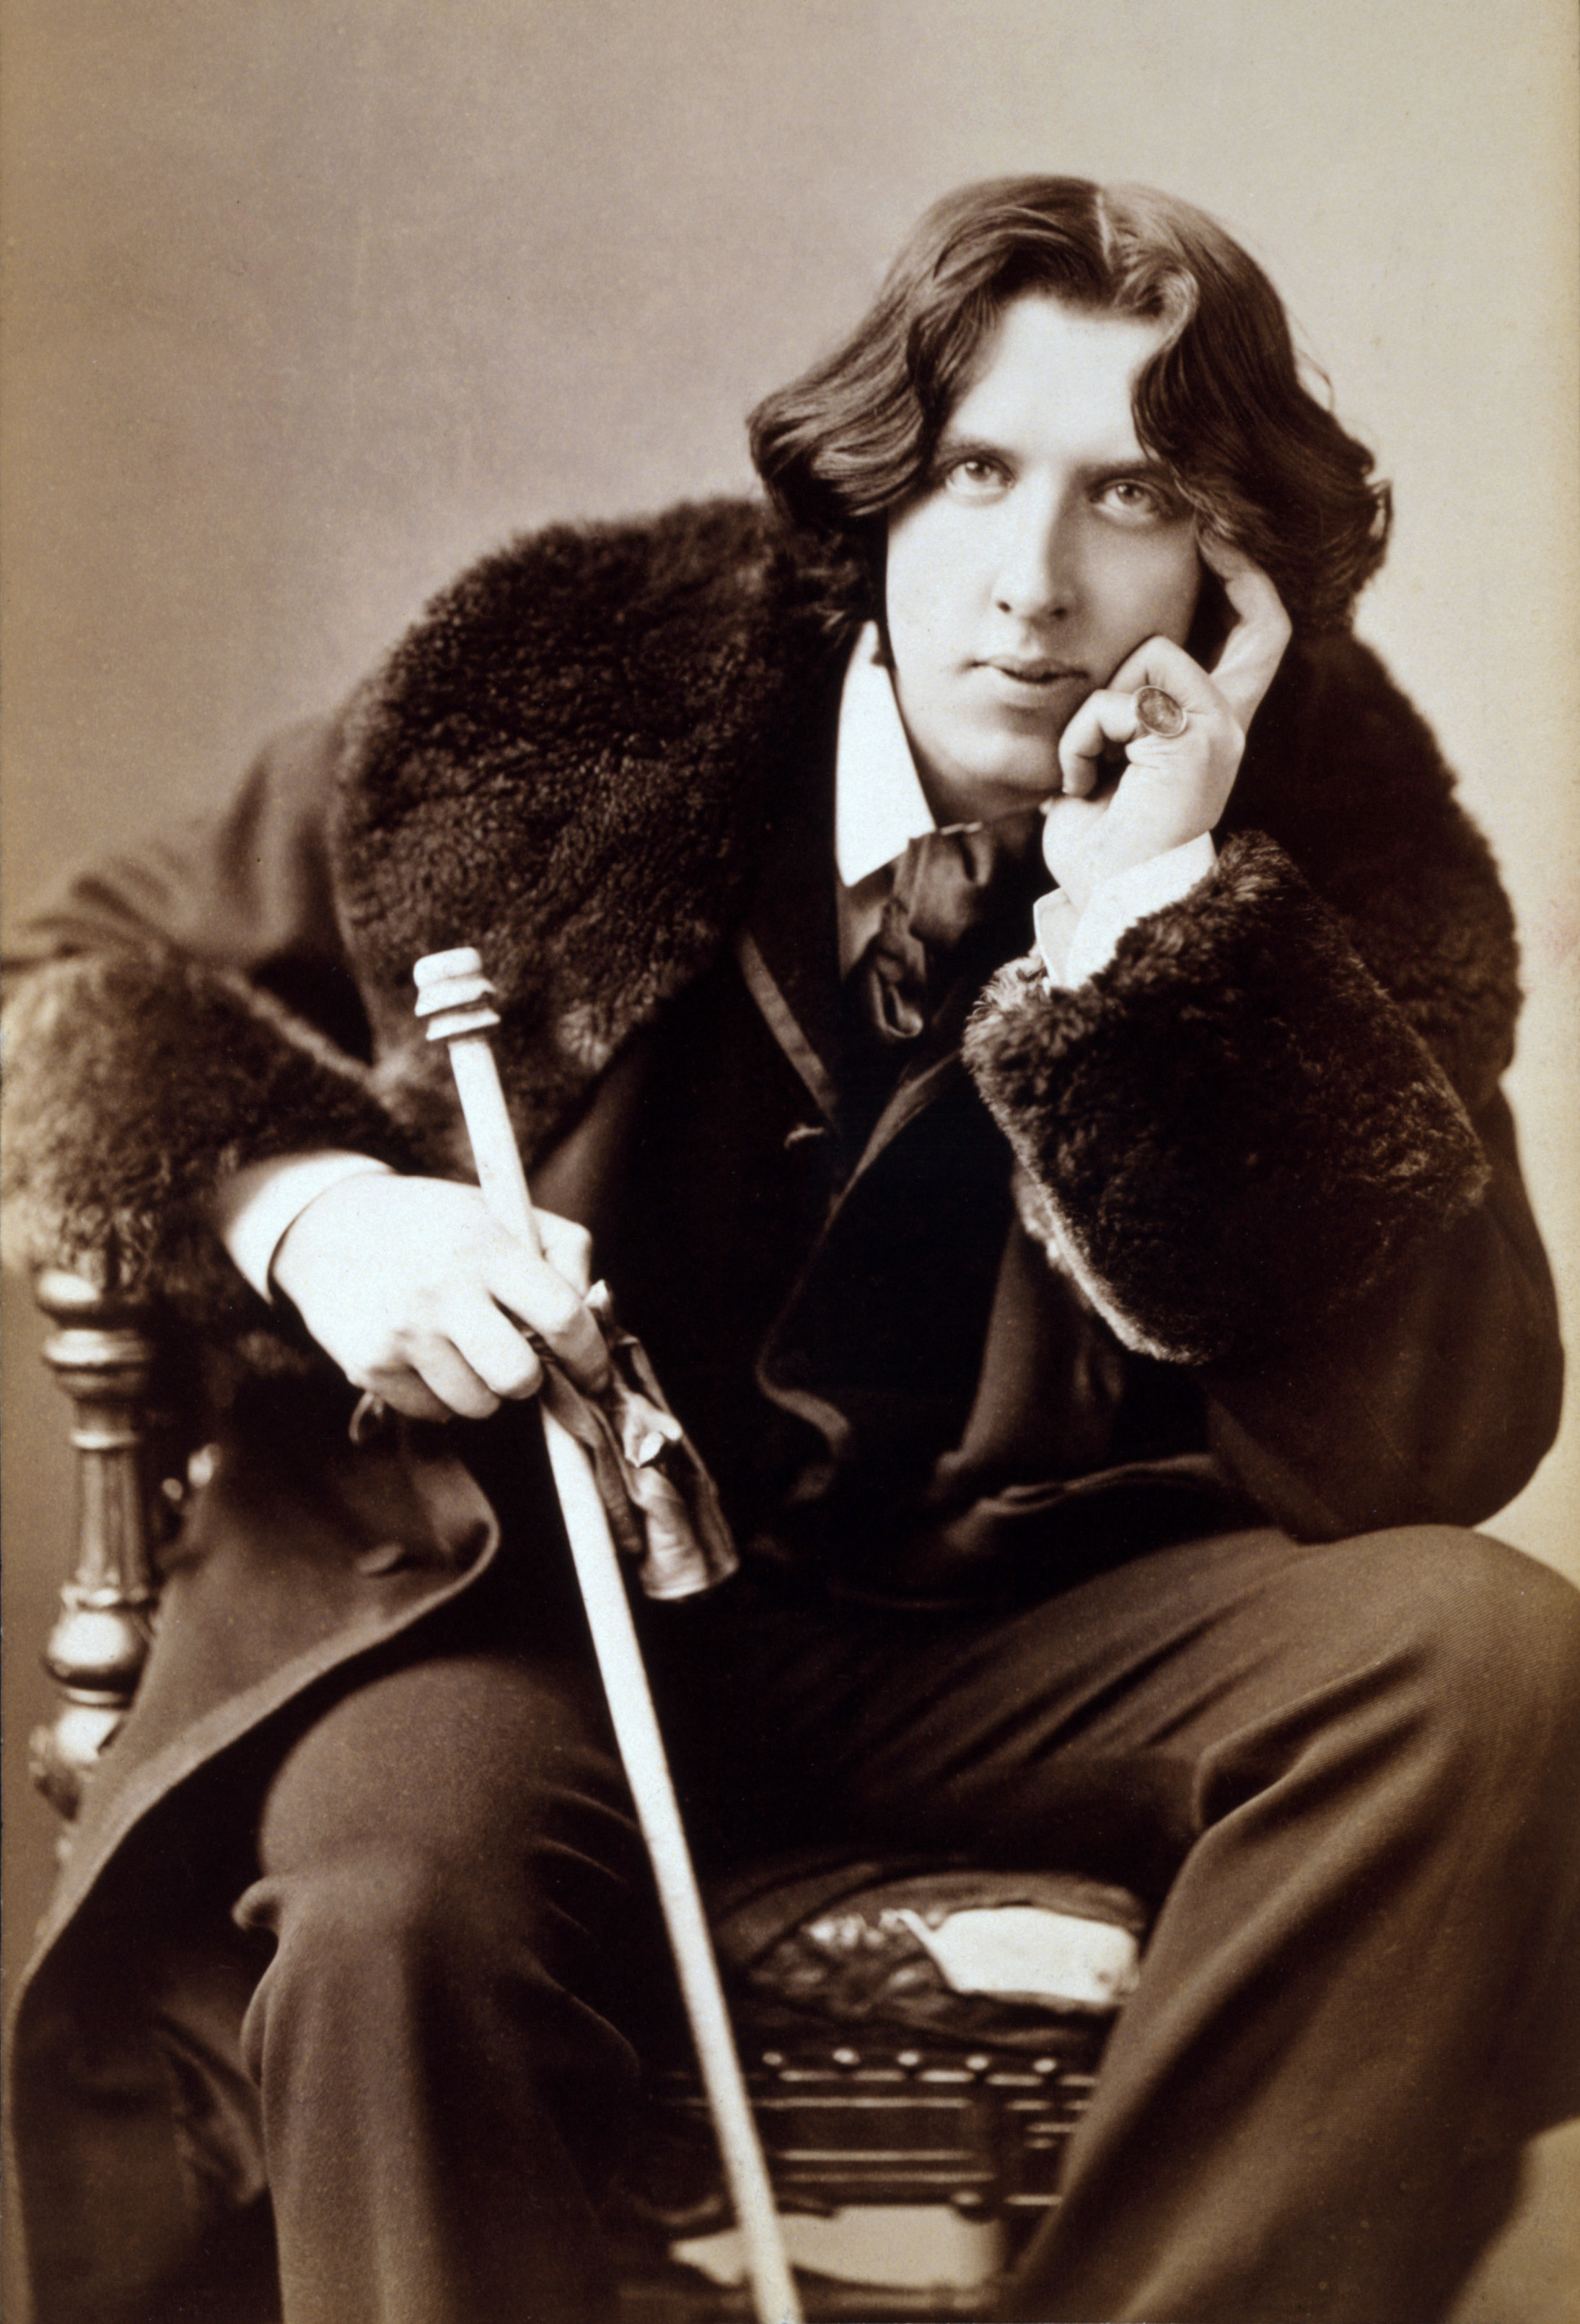 Picture of Oscar Wilde